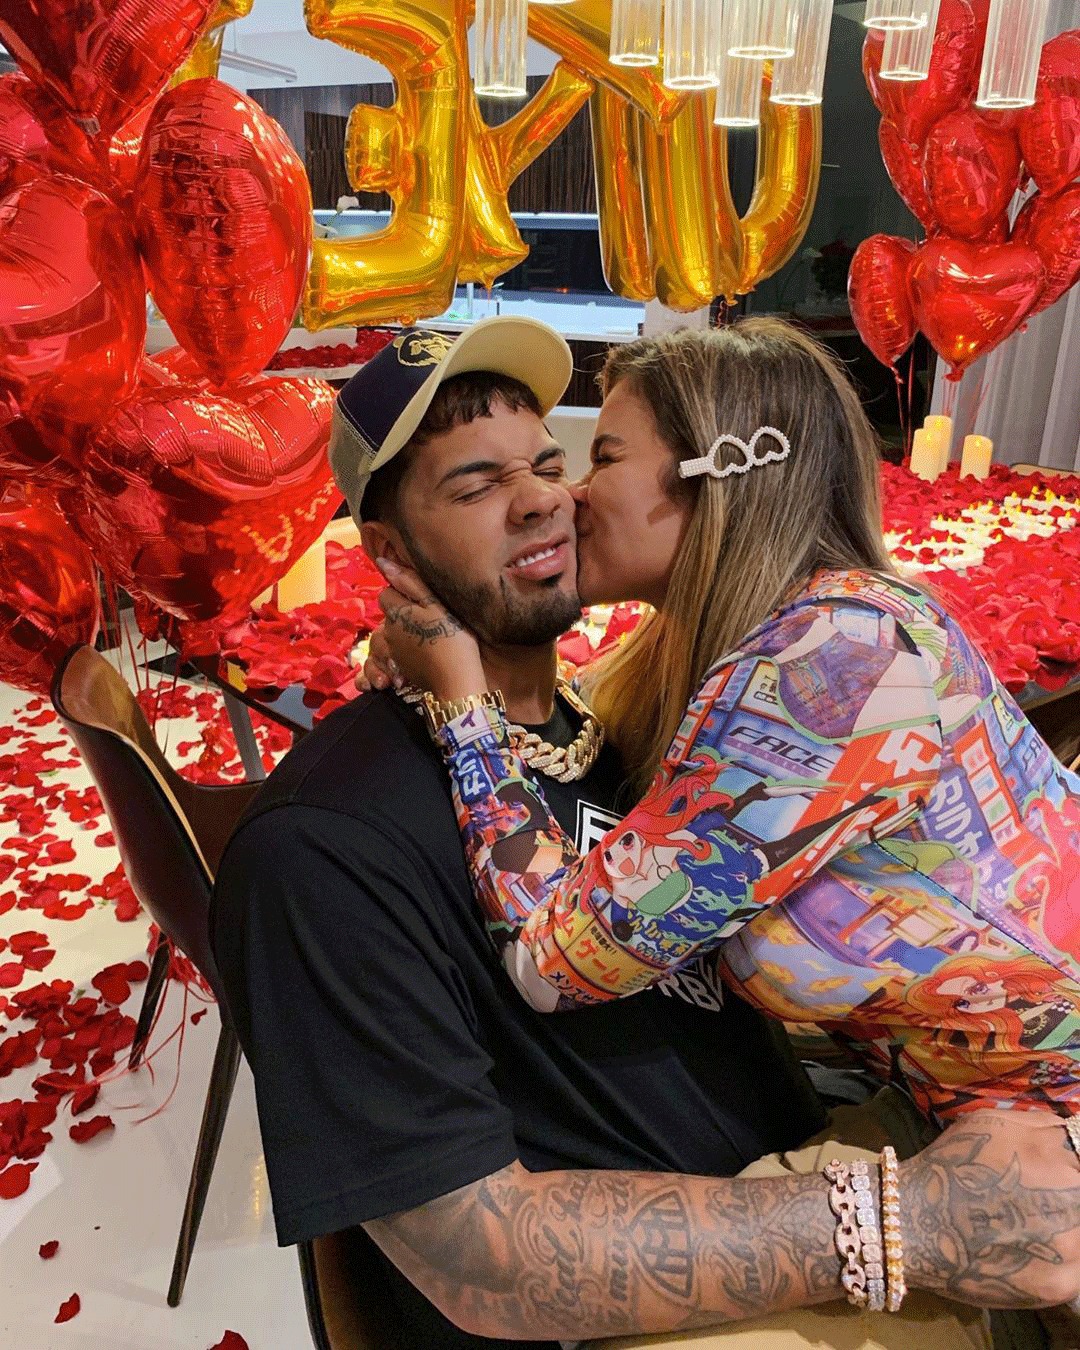 Anuel AA and Karol G Are the Definition of Couple Goals See Their